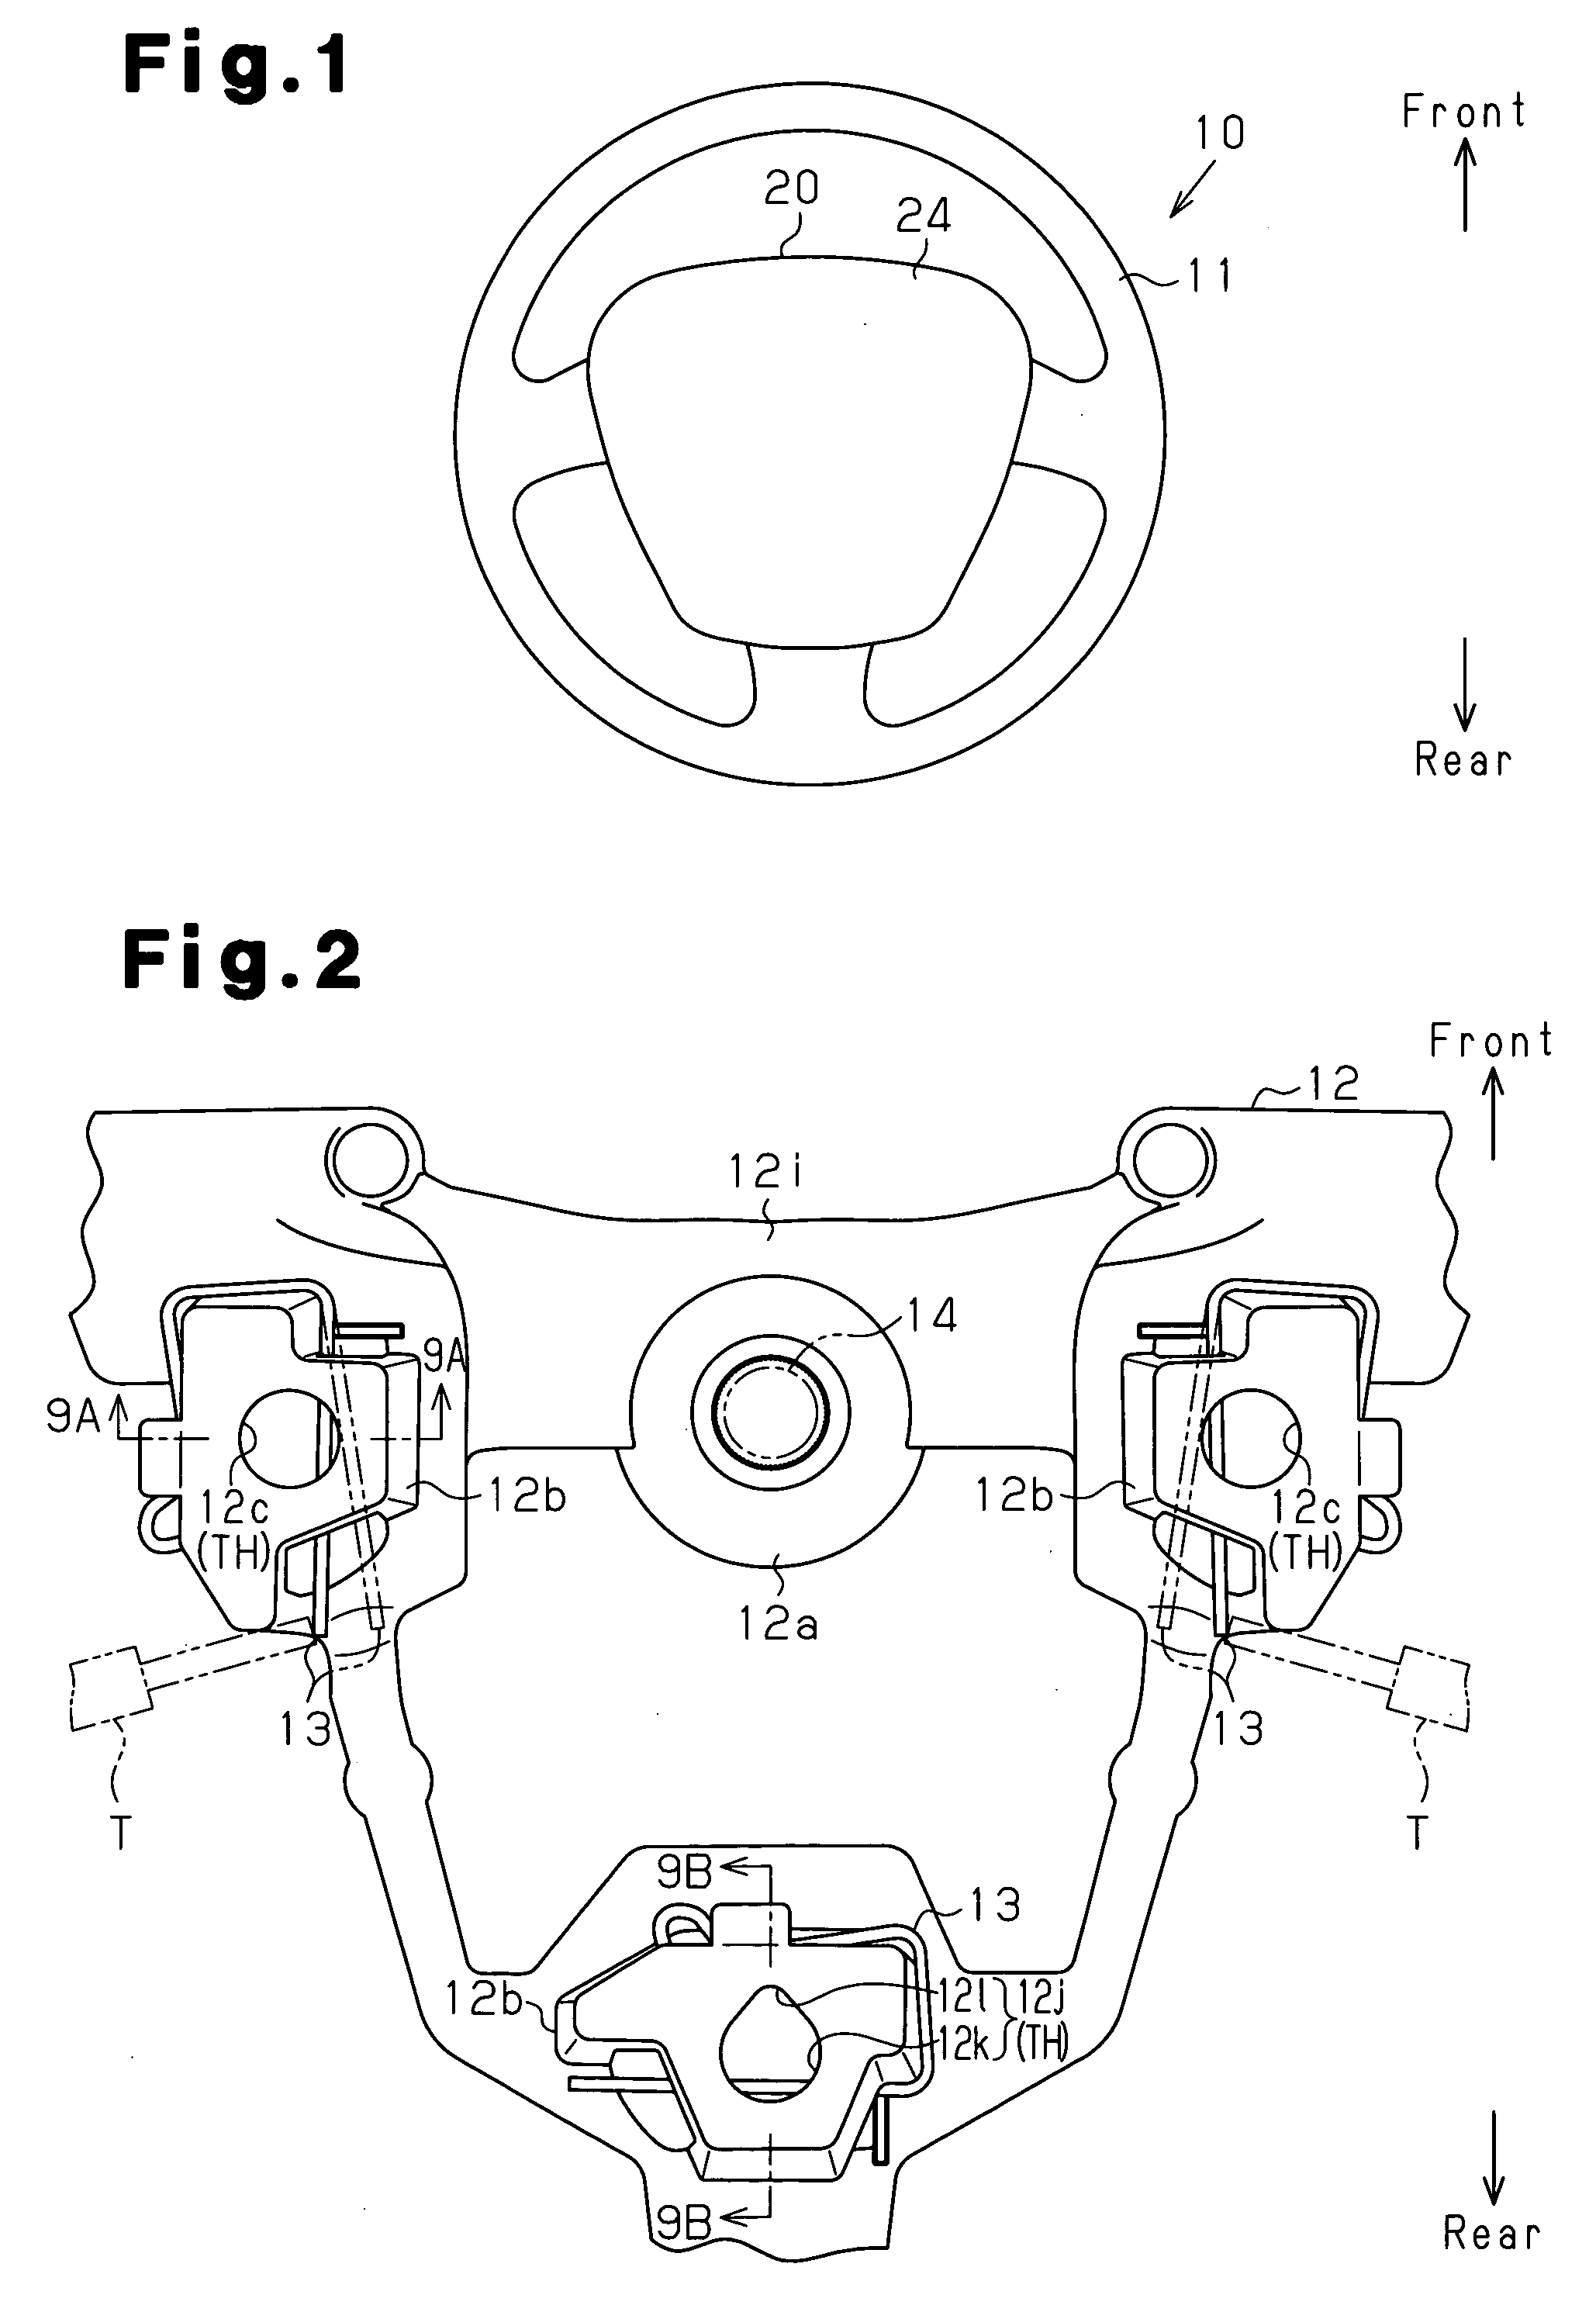 Airbag-equipped steering wheel device